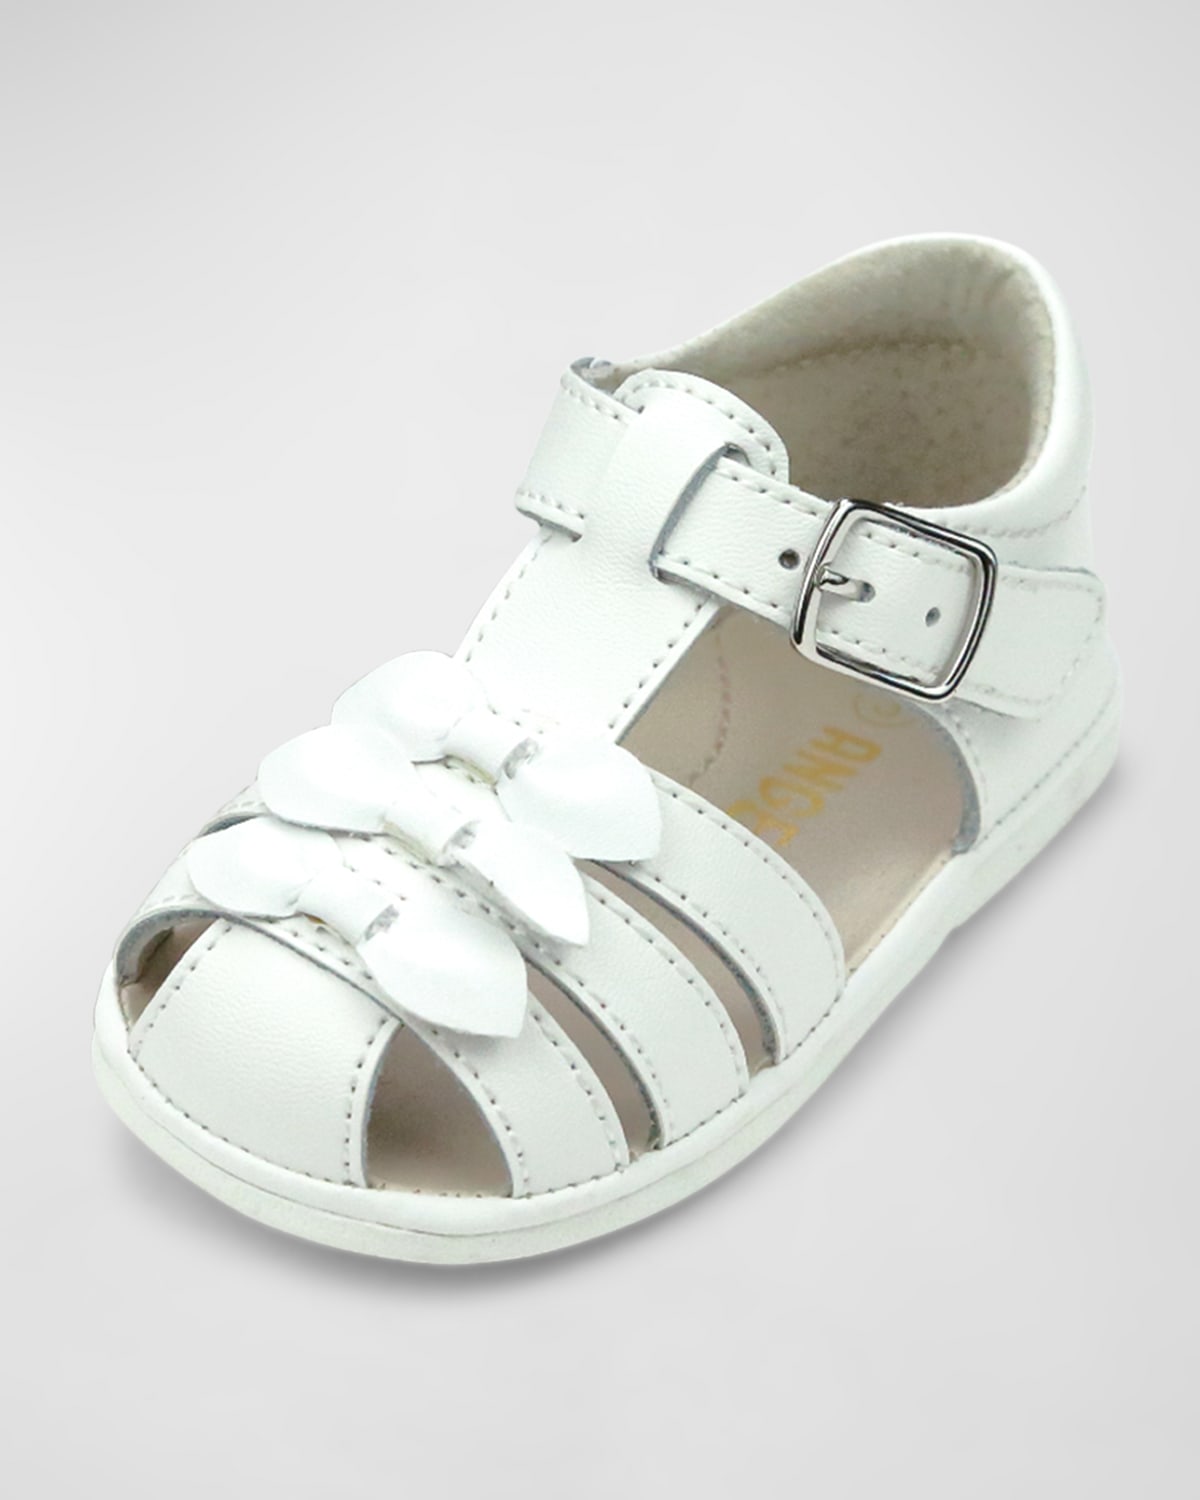 L'amour Shoes Kids' Girl's Everly Baby Bow Sandals, Baby In White